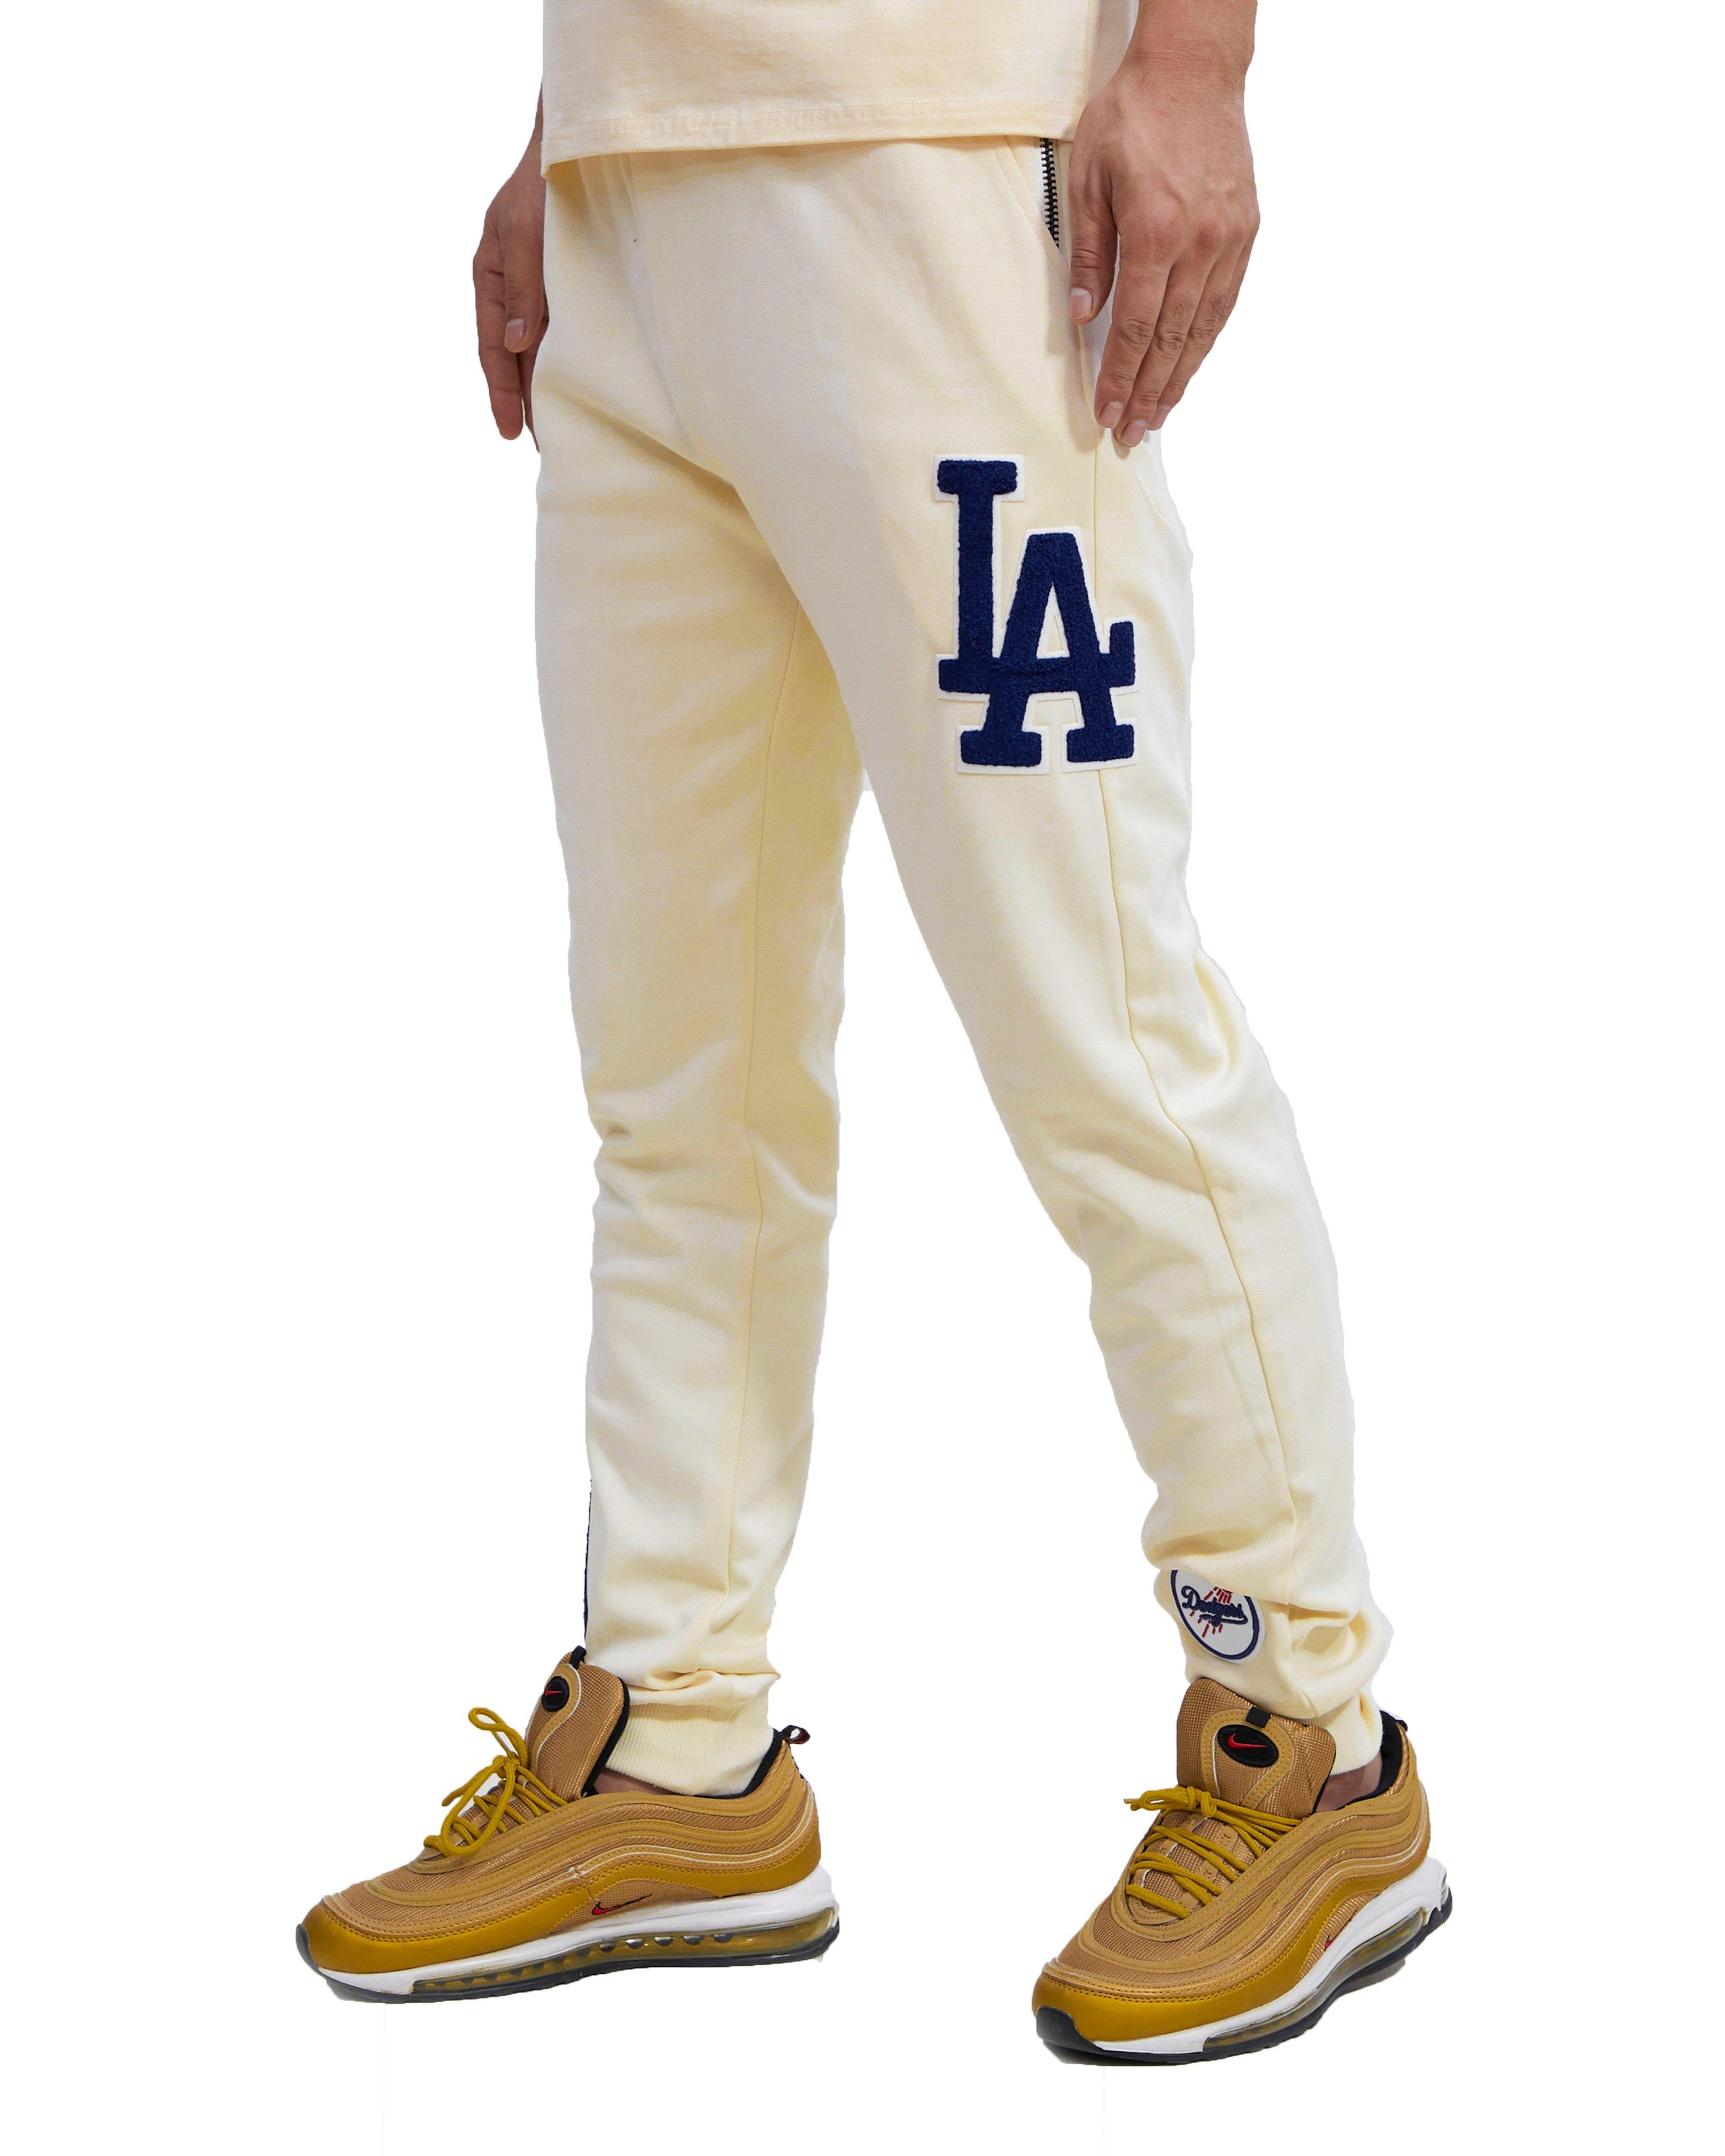 Concepts Sport Los Angeles Rams White Alley Fleece Cargo Sweatpants, White, 75% COTTON/25% POLYESTER, Size L, Rally House